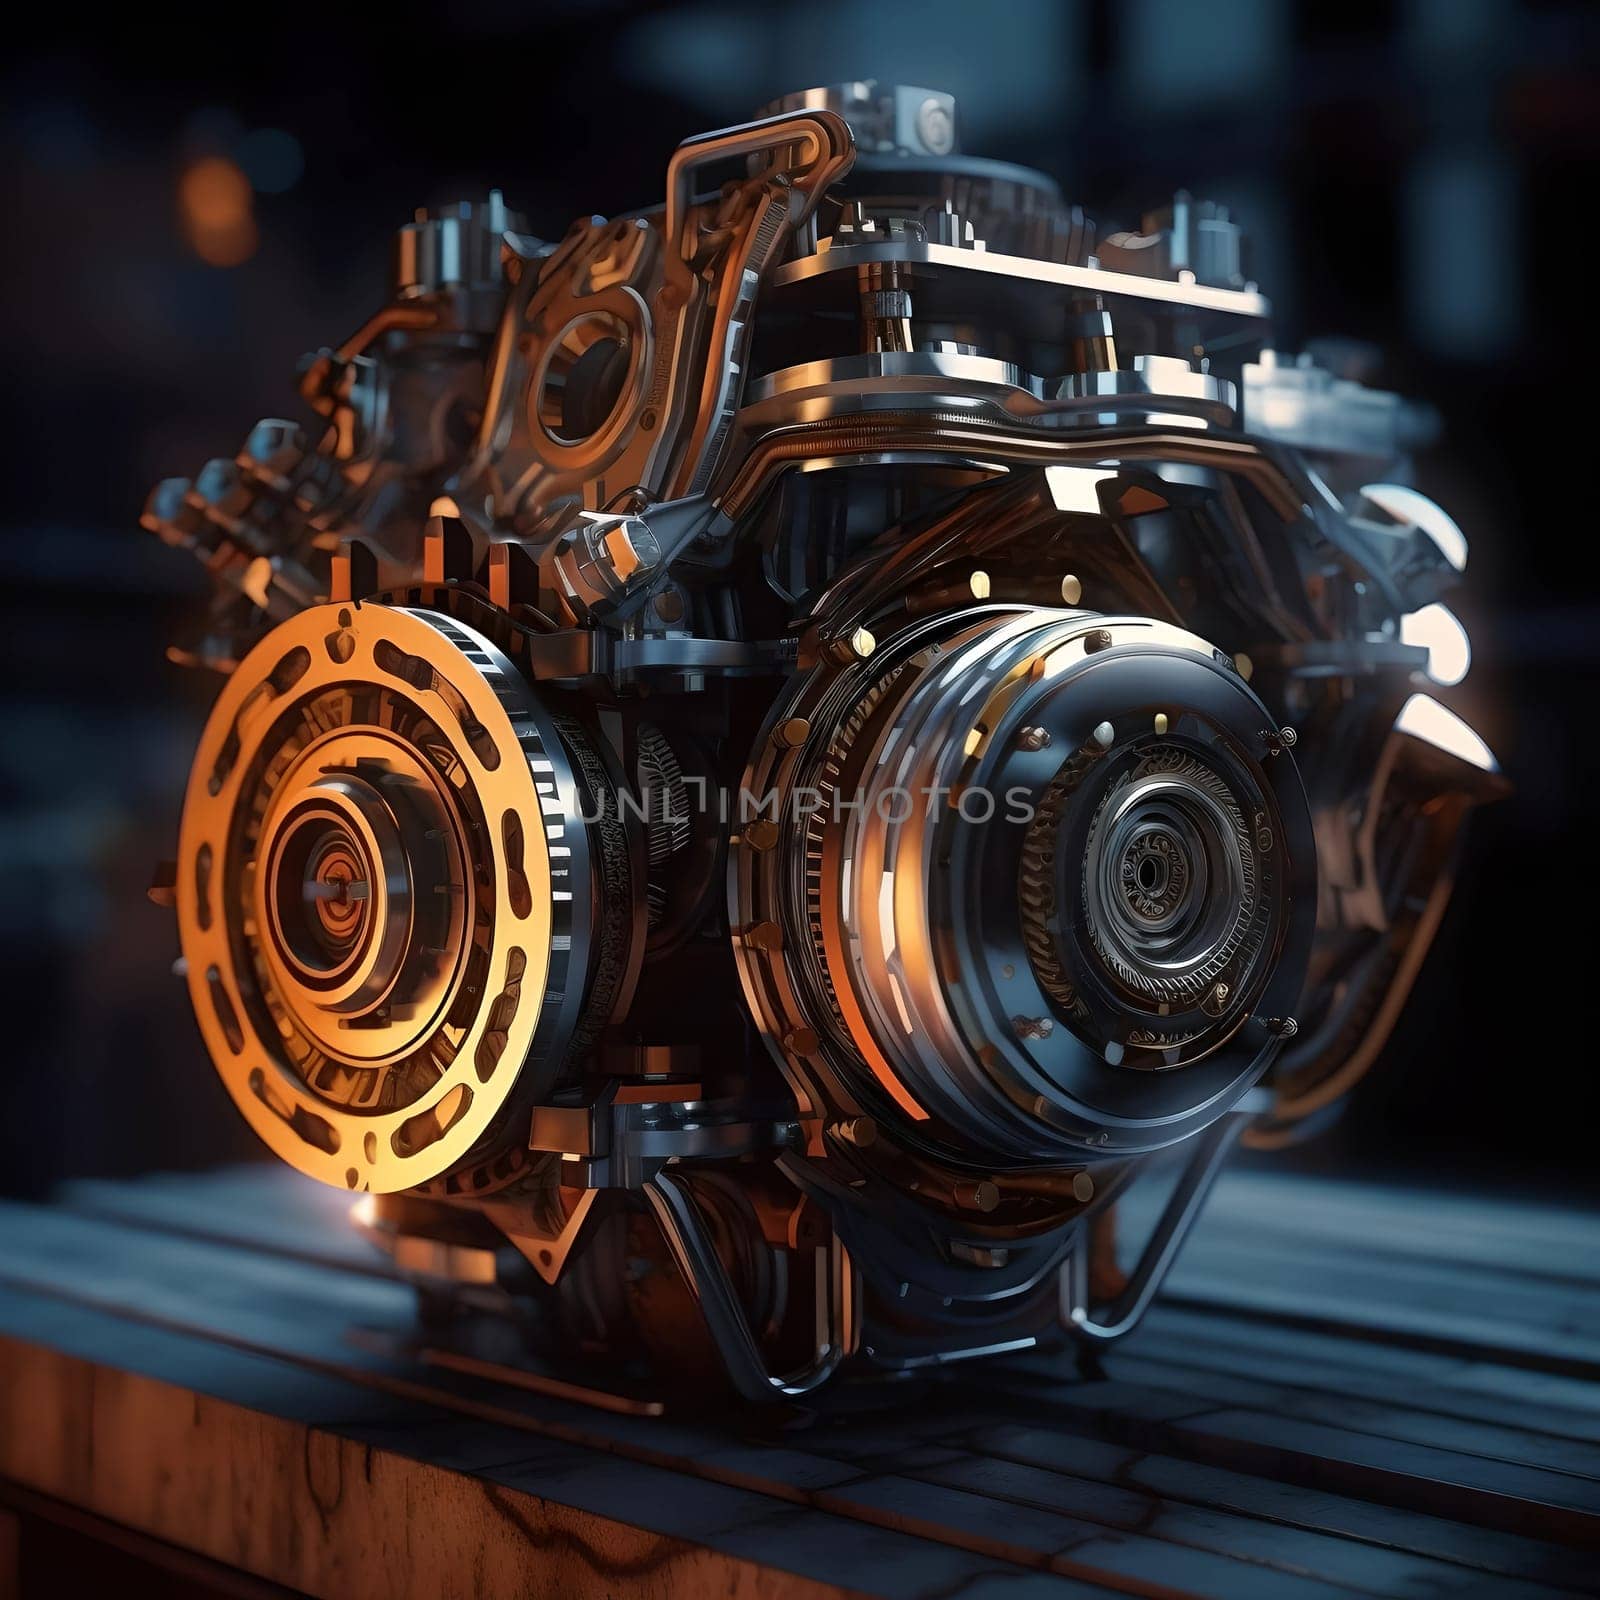 The engine of the future on a dark background. A vision for the future